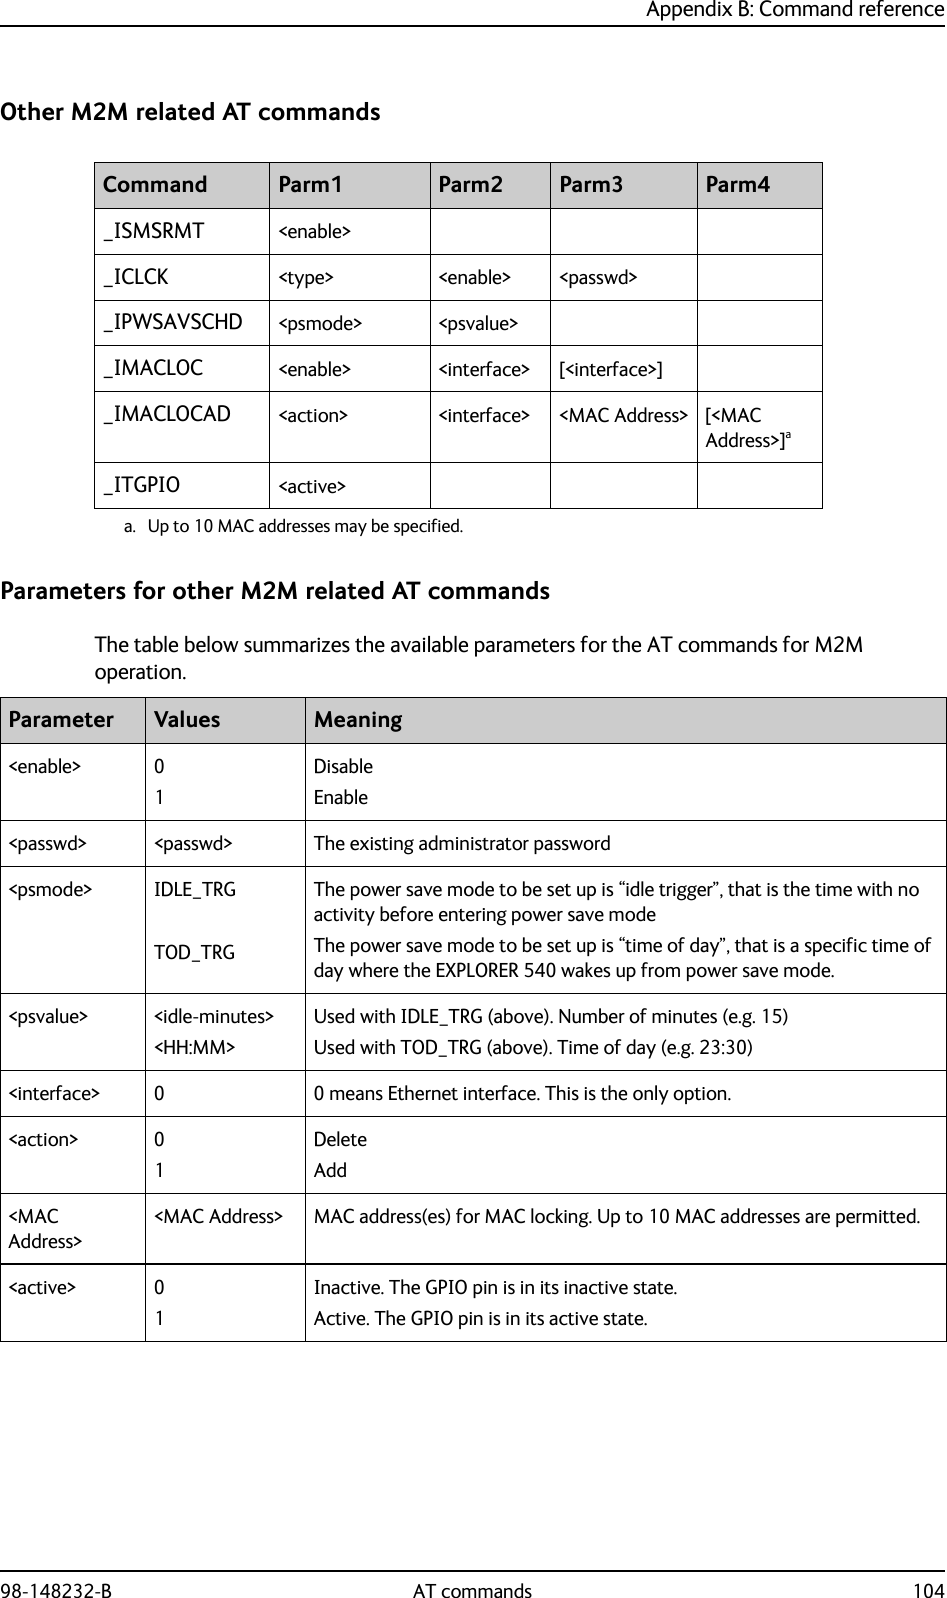 Appendix B: Command reference98-148232-B AT commands 104Other M2M related AT commandsParameters for other M2M related AT commandsThe table below summarizes the available parameters for the AT commands for M2M operation.Command Parm1 Parm2 Parm3 Parm4_ISMSRMT &lt;enable&gt;_ICLCK &lt;type&gt; &lt;enable&gt; &lt;passwd&gt;_IPWSAVSCHD &lt;psmode&gt; &lt;psvalue&gt;_IMACLOC &lt;enable&gt; &lt;interface&gt; [&lt;interface&gt;]_IMACLOCAD &lt;action&gt; &lt;interface&gt; &lt;MAC Address&gt; [&lt;MAC Address&gt;]aa. Up to 10 MAC addresses may be specified._ITGPIO &lt;active&gt;Parameter Values Meaning&lt;enable&gt; 01DisableEnable&lt;passwd&gt; &lt;passwd&gt; The existing administrator password&lt;psmode&gt; IDLE_TRGTOD_TRGThe power save mode to be set up is “idle trigger”, that is the time with no activity before entering power save modeThe power save mode to be set up is “time of day”, that is a specific time of day where the EXPLORER 540 wakes up from power save mode.&lt;psvalue&gt; &lt;idle-minutes&gt;&lt;HH:MM&gt;Used with IDLE_TRG (above). Number of minutes (e.g. 15)Used with TOD_TRG (above). Time of day (e.g. 23:30)&lt;interface&gt; 0 0 means Ethernet interface. This is the only option.&lt;action&gt; 01DeleteAdd&lt;MAC Address&gt;&lt;MAC Address&gt; MAC address(es) for MAC locking. Up to 10 MAC addresses are permitted.&lt;active&gt; 01Inactive. The GPIO pin is in its inactive state.Active. The GPIO pin is in its active state.